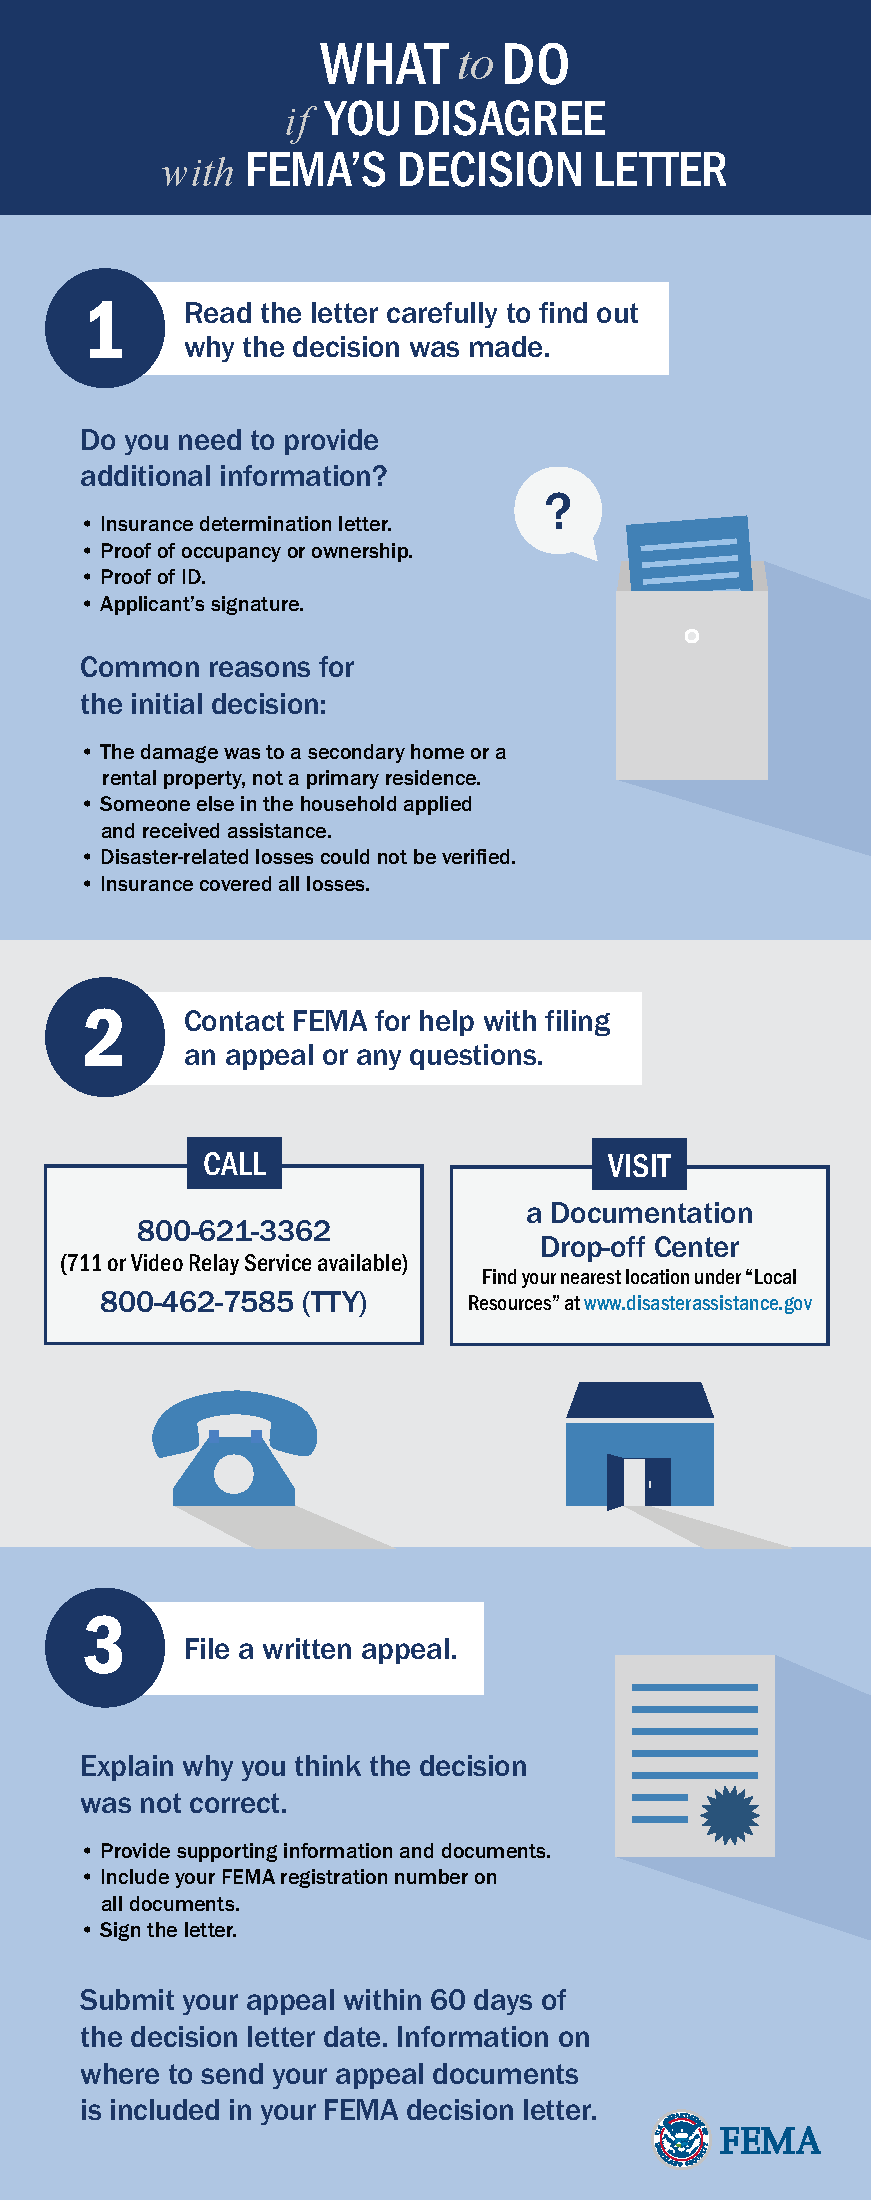 Appeals should be submitted 60 days after the initial decision:  By mail: FEMA’s Individuals and Households Program, National Processing Service Center, P.O. Box 10055, Hyattsville MD 20782-7055. By fax: 1-800-827-8112. Online via a FEMA online account: to set up an online account, visit www.DisasterAssistance.gov, click on “Check Status” and follow the directions. Visit a Documentation Drop-off Center: Locations and hours can be found online at DisasterAssistance.gov, by scrolling down and searching “Michigan” under the “Find Local Resources” section on the main page.